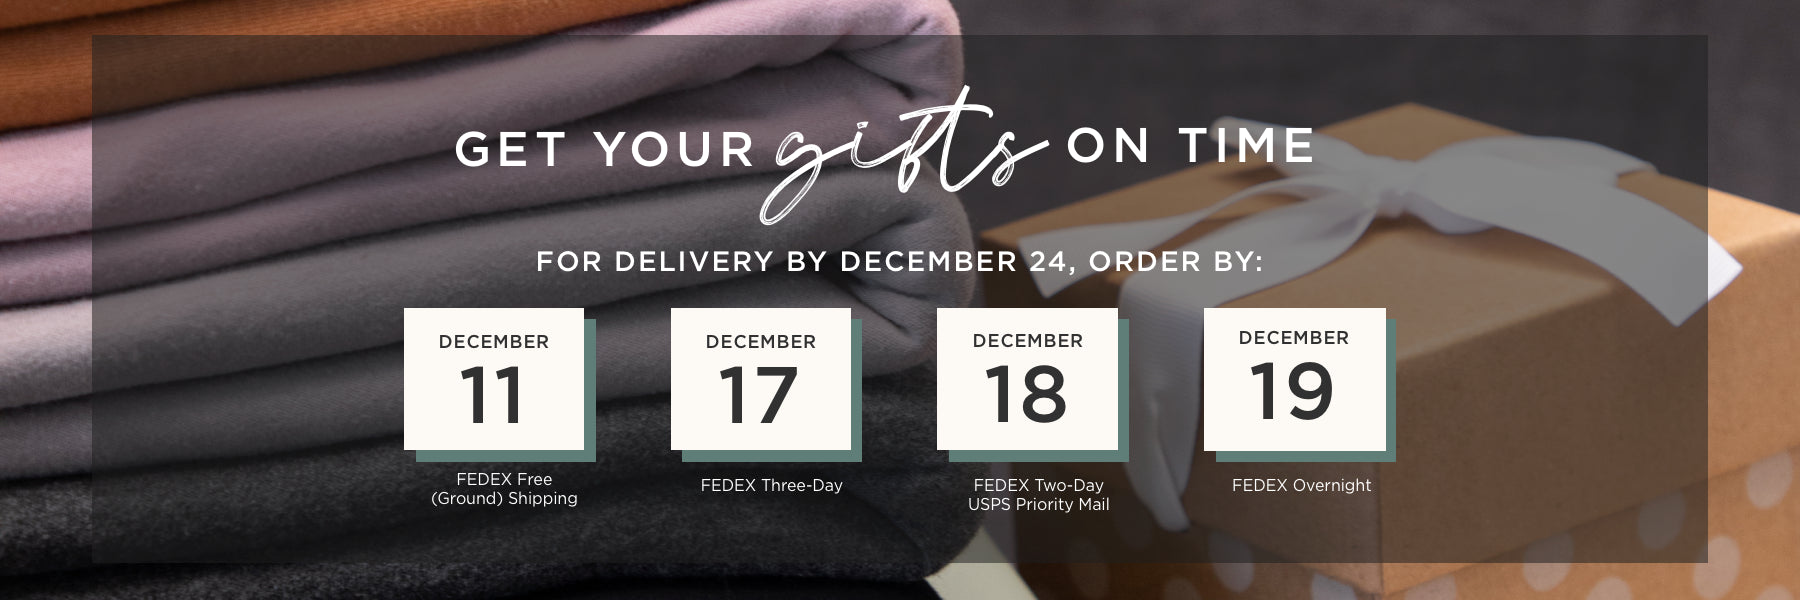 Get your gifts on time! For delivery by 12/24, order by 12/11 for fedex free ground shipping, 12/17 for fedex 3 day shipping, 12/18 for fedex 2 day or usps priority mail, or 12/19 for fedex overnight shipping